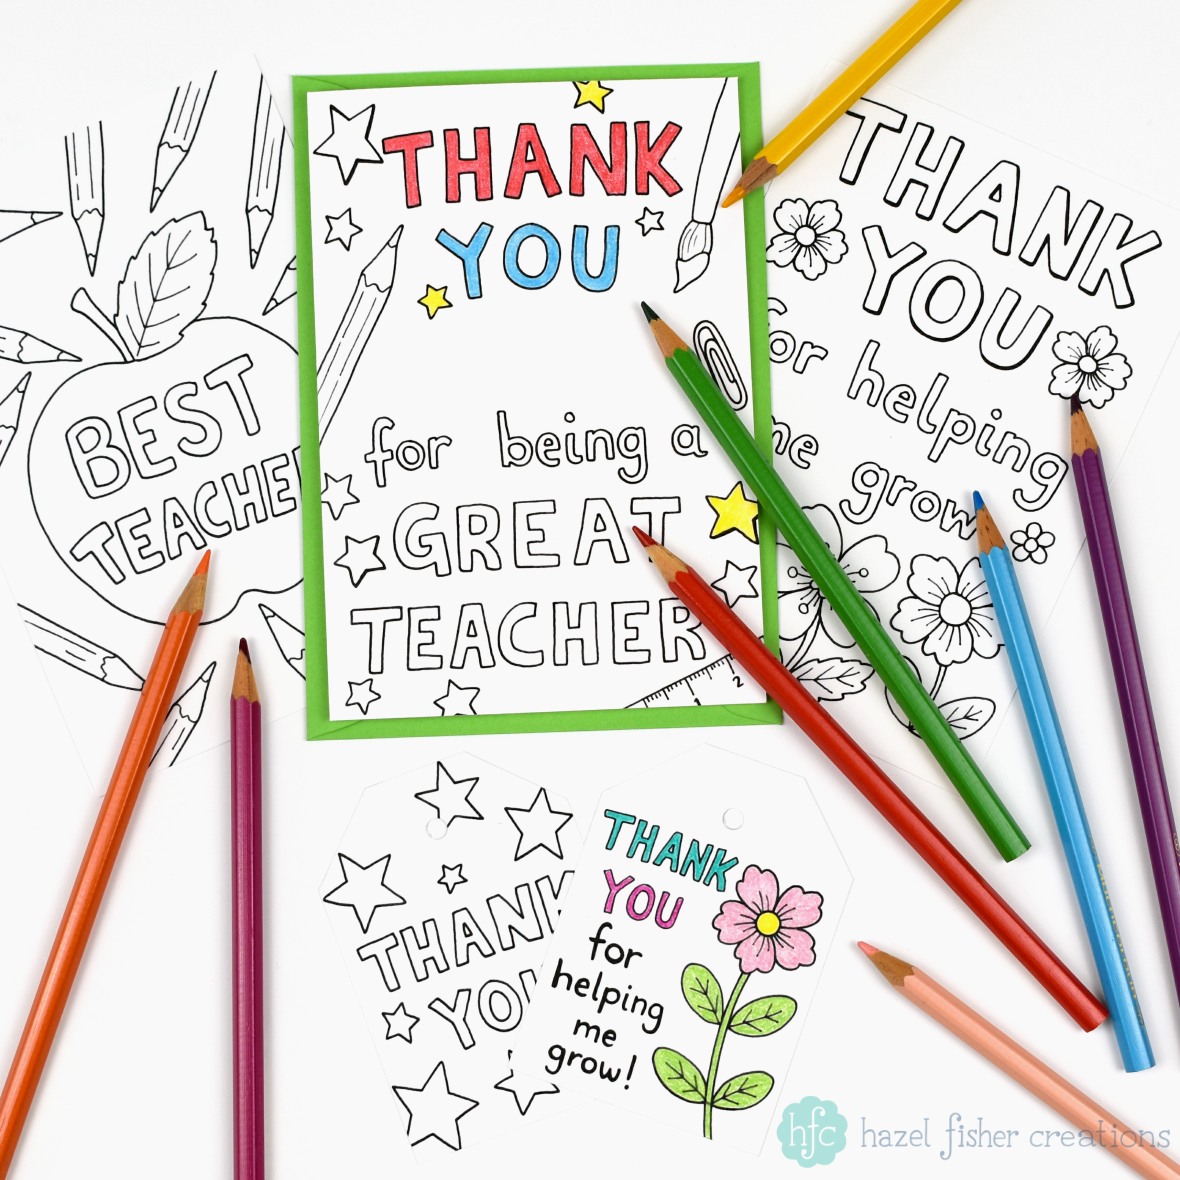 Hazel Fisher Creations Gift Ideas for Teachers and Printable Thank You